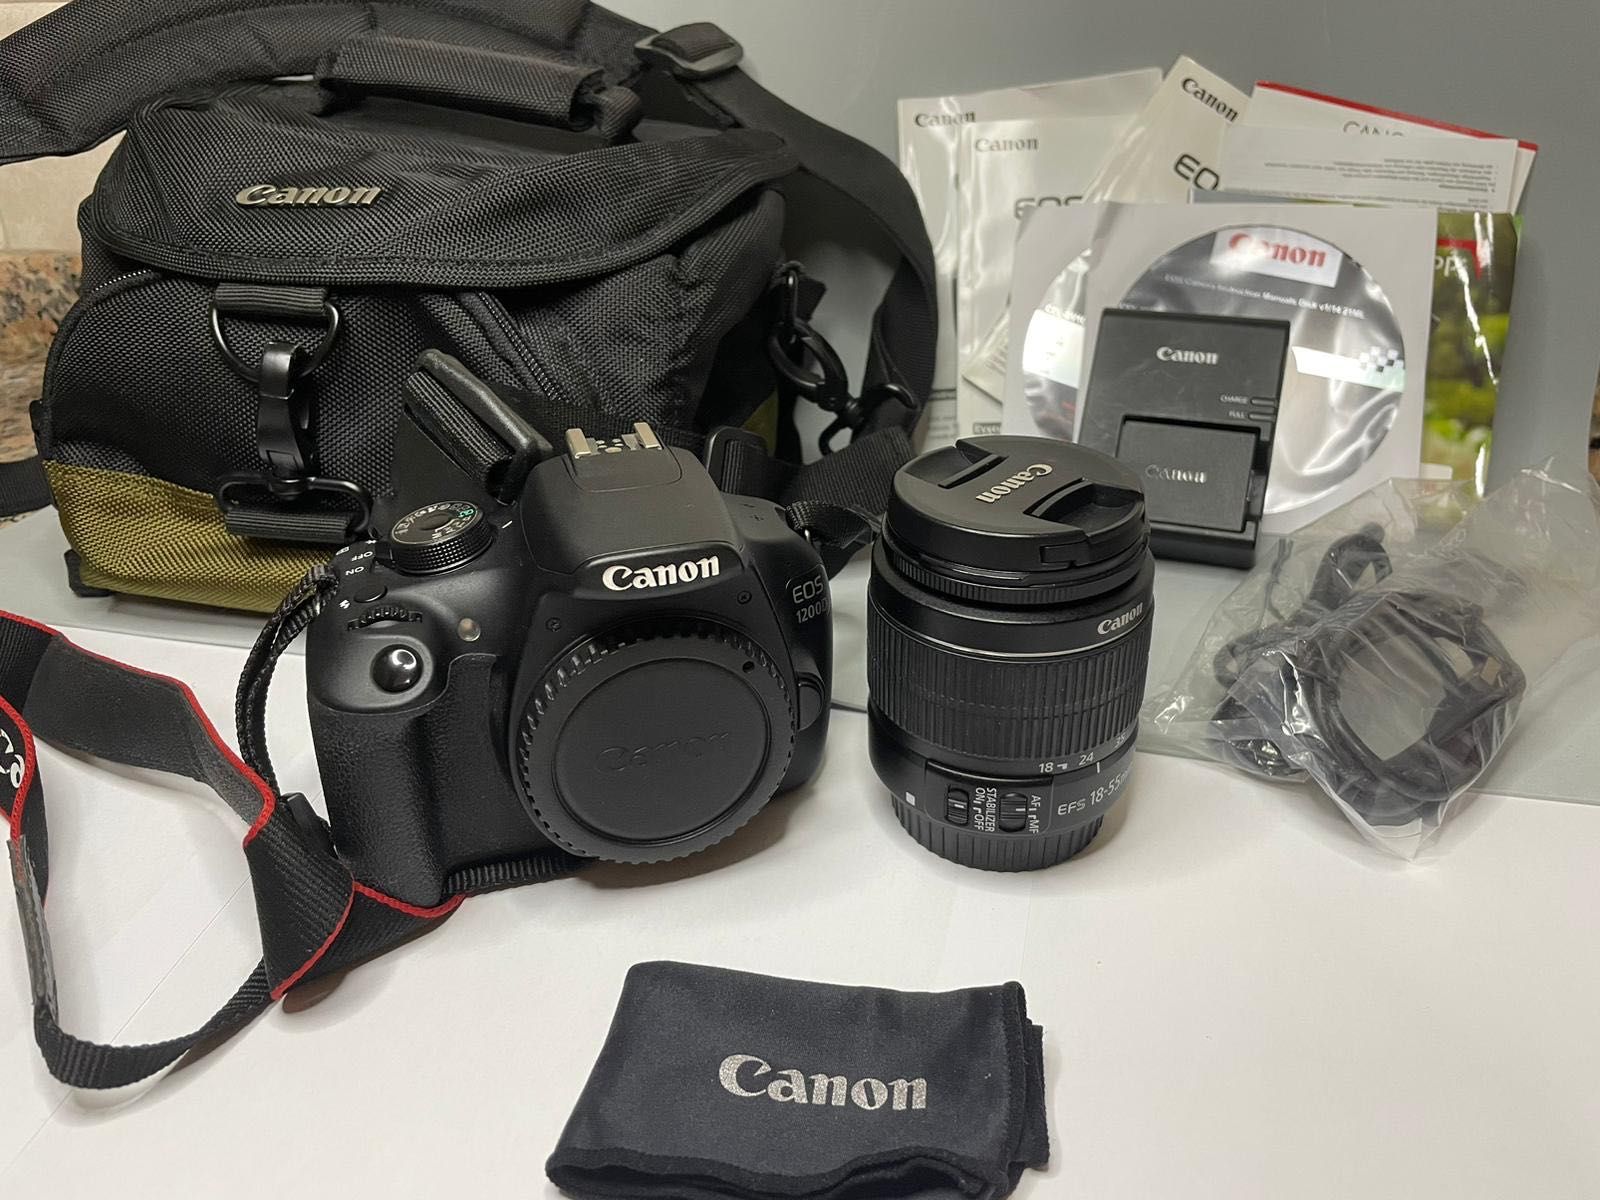 Pack completo Canon 1200d